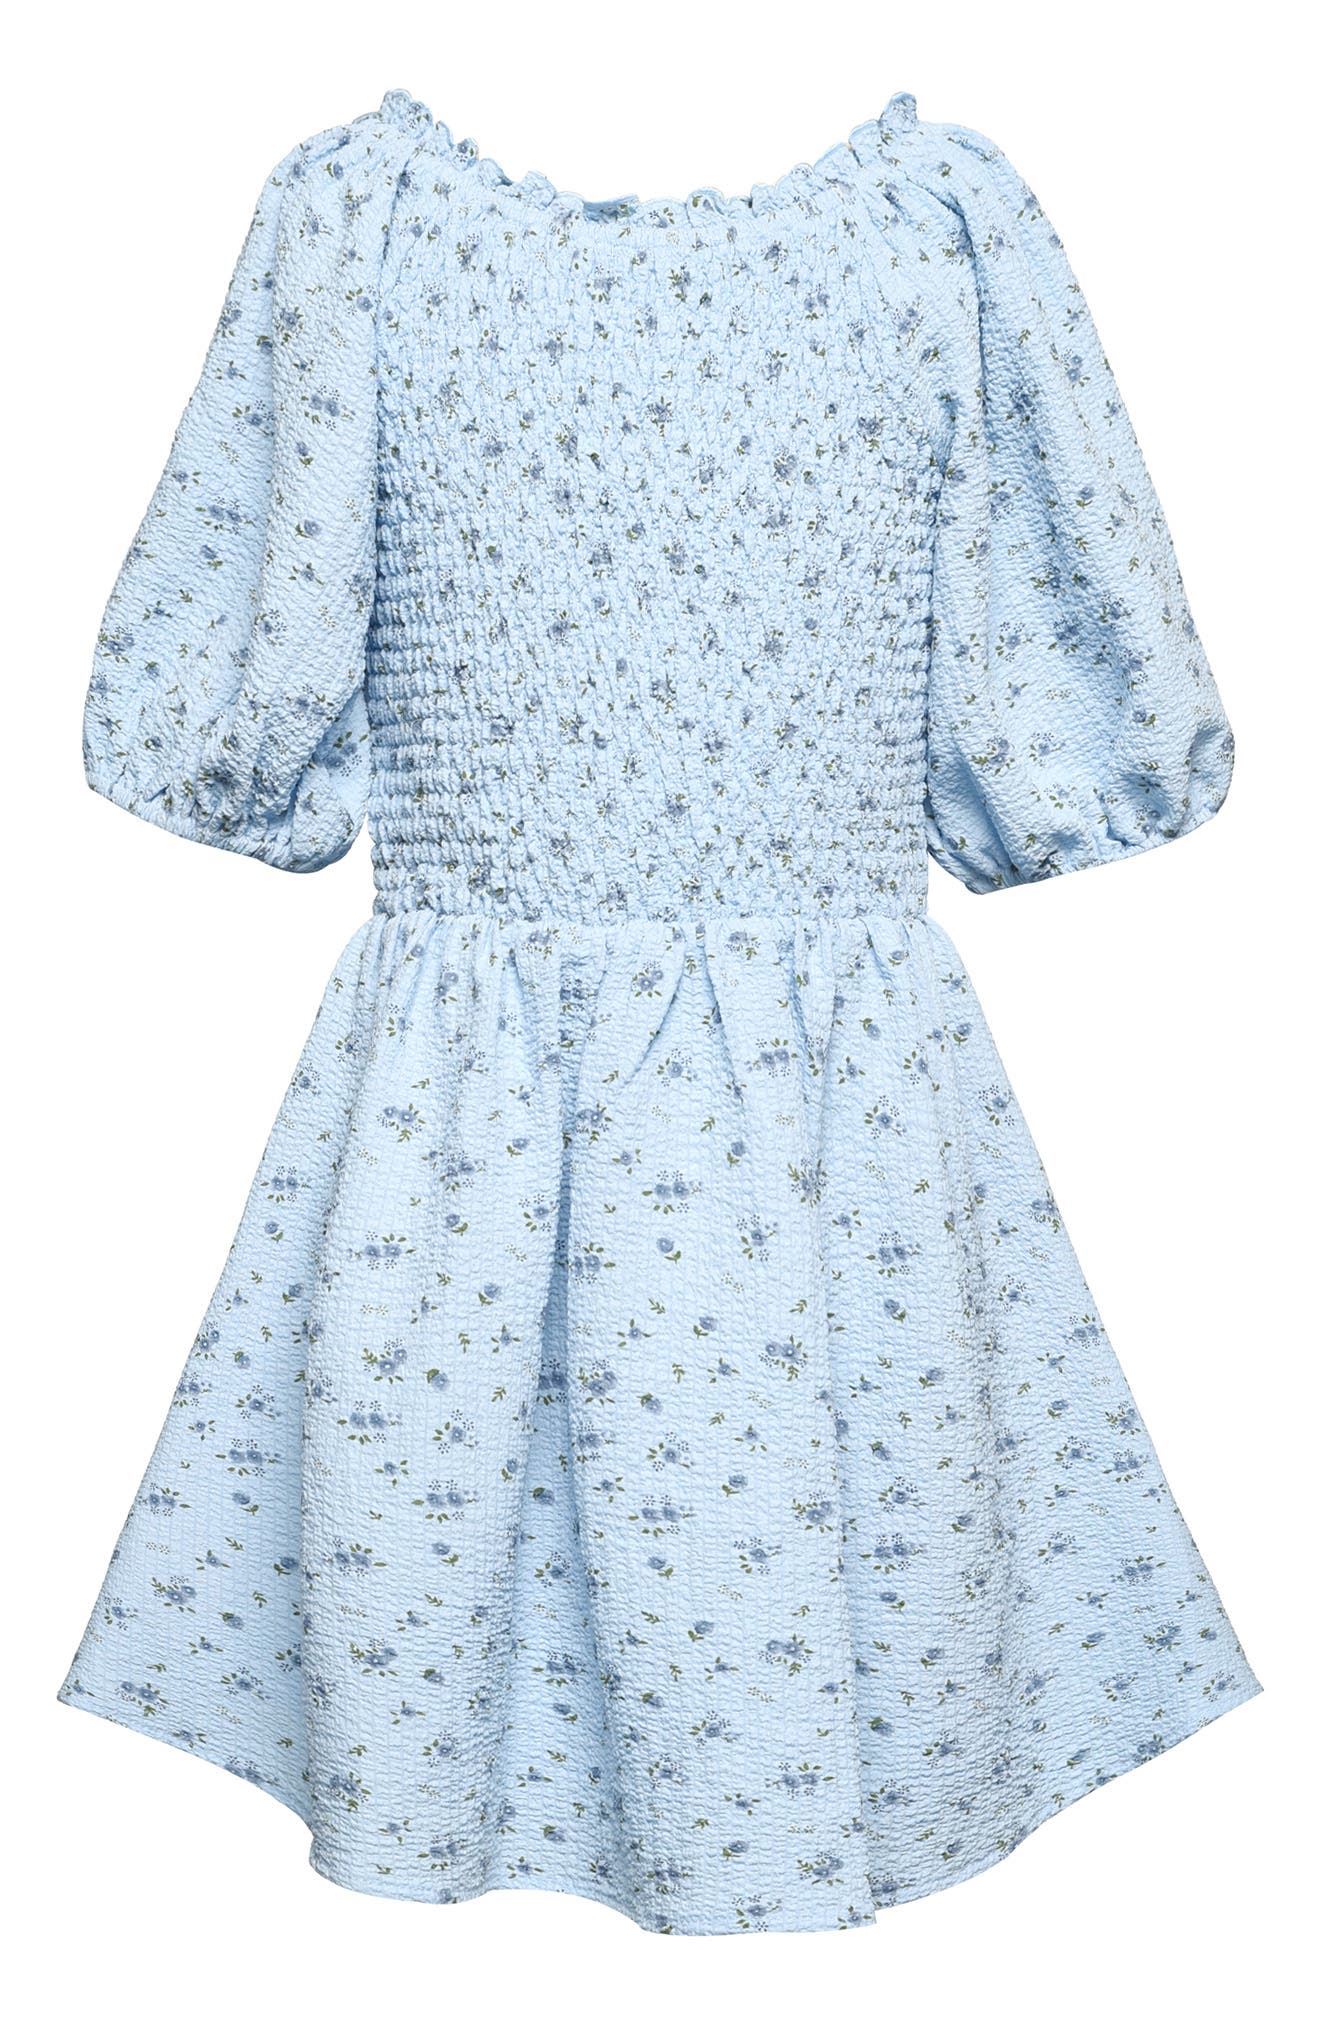 Nordstrom Clothing Dresses Puff Sleeve Dress Kids Puff Sleeve French Terry Dress in Grey Heather at Nordstrom 